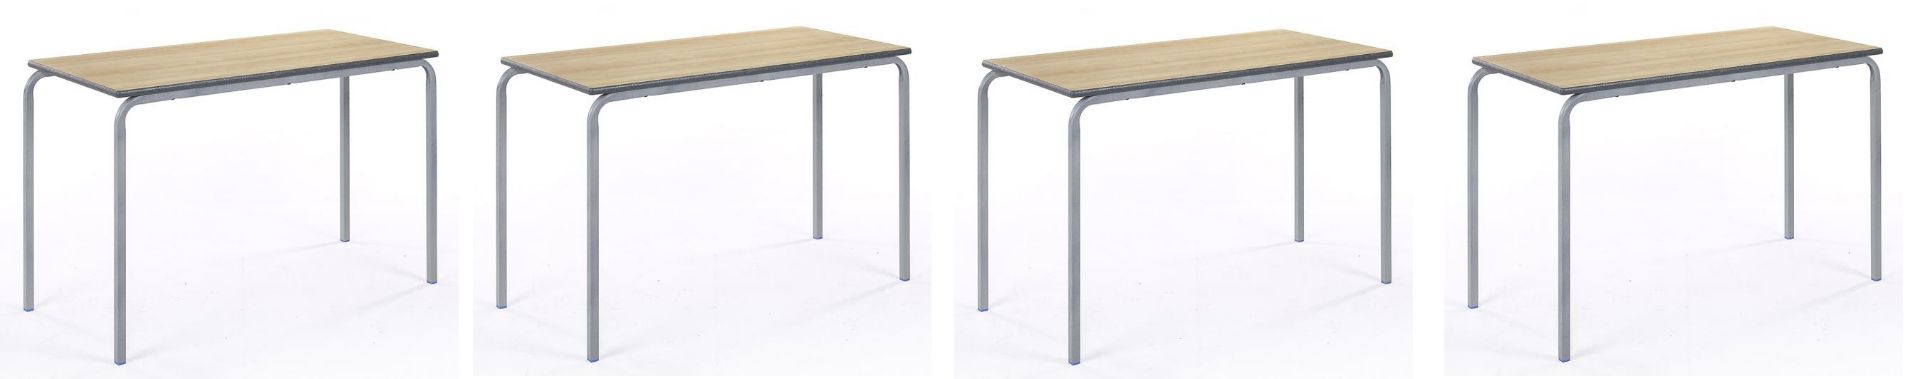 V Grade A A Lot Of Four Stacking Tables ISP £190.80 (ELF) (Image May Vary Slightly From Item)